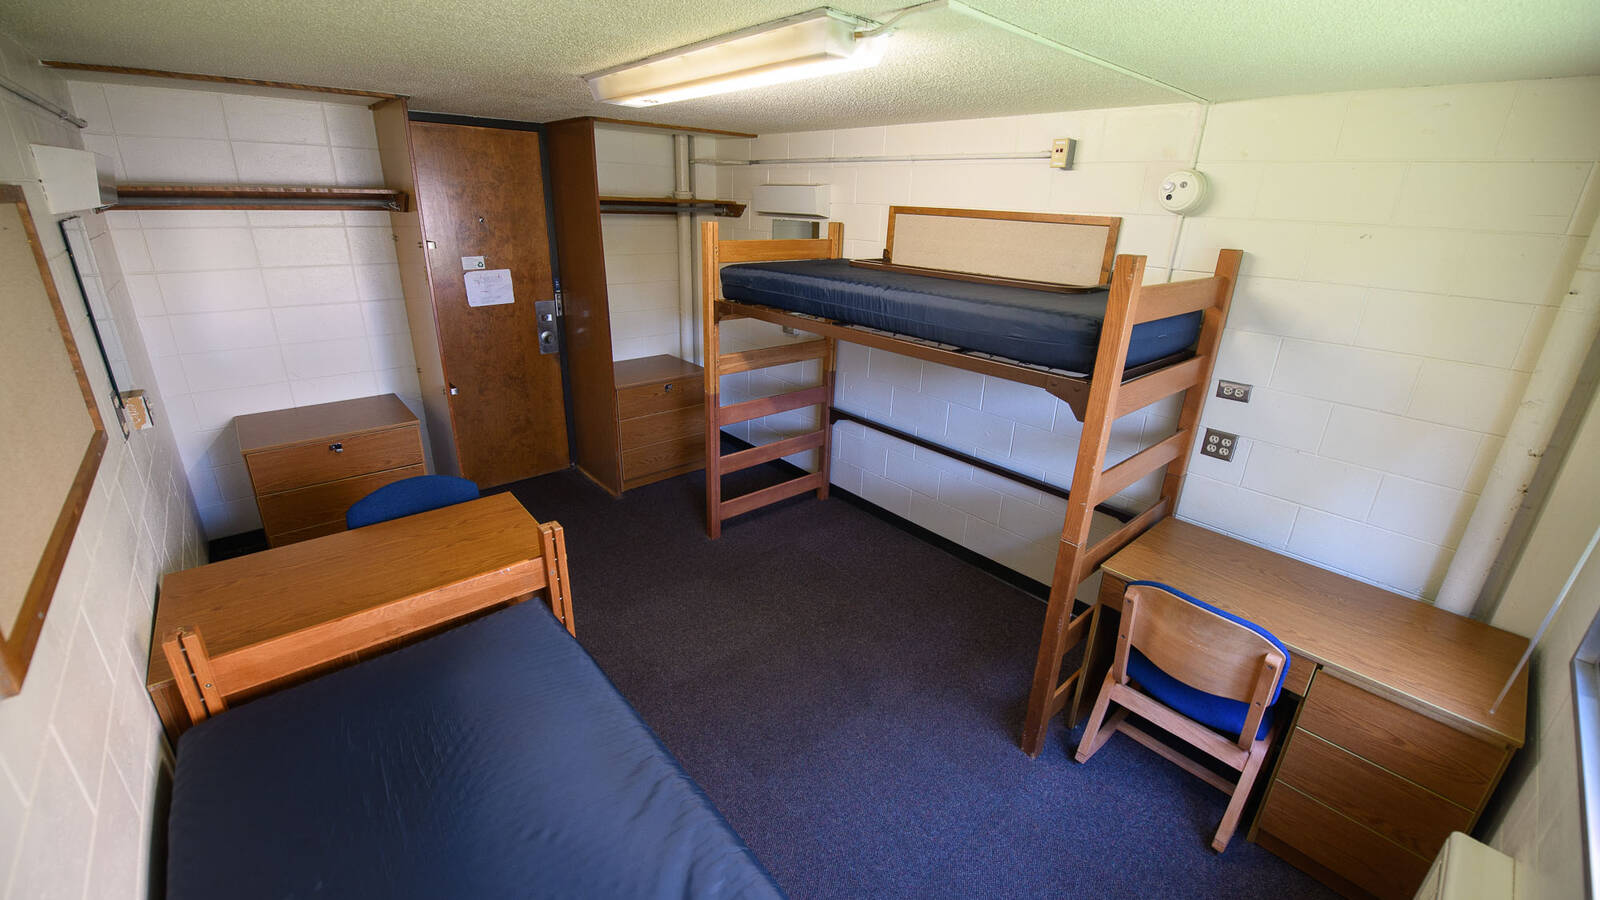 Murry Hall room (viewed from the wall opposite the door) with two beds, chairs, desks, dressers, and closet hanging space.